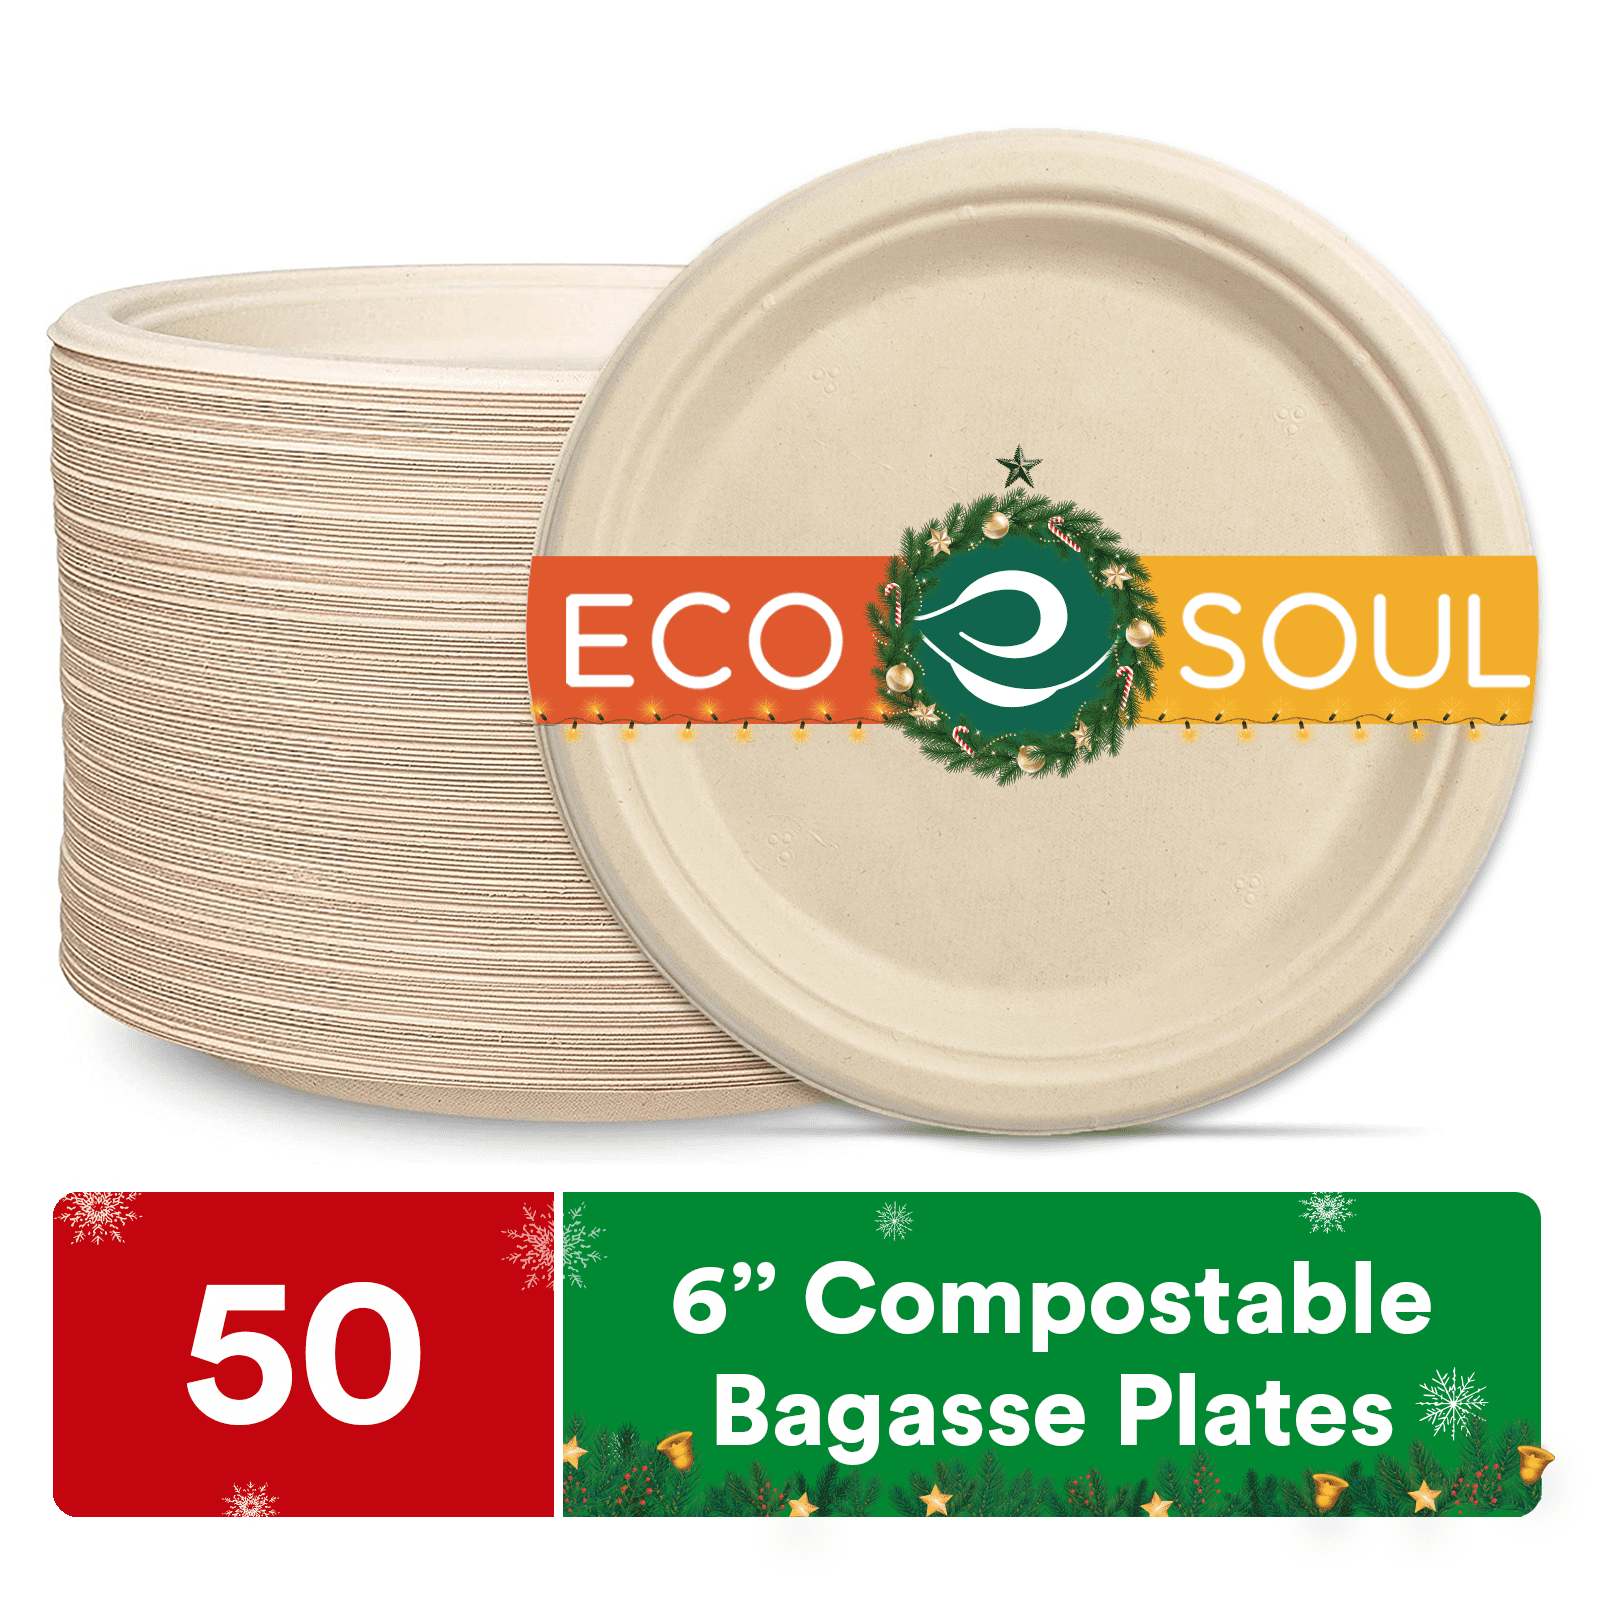 9 inch Paper Plates Bulk, 400 Count Disposable Paper Plates, 100%  Compostable Plates Eco Friendly Recycled Paper Plates Dinner Size, Brown  Paper